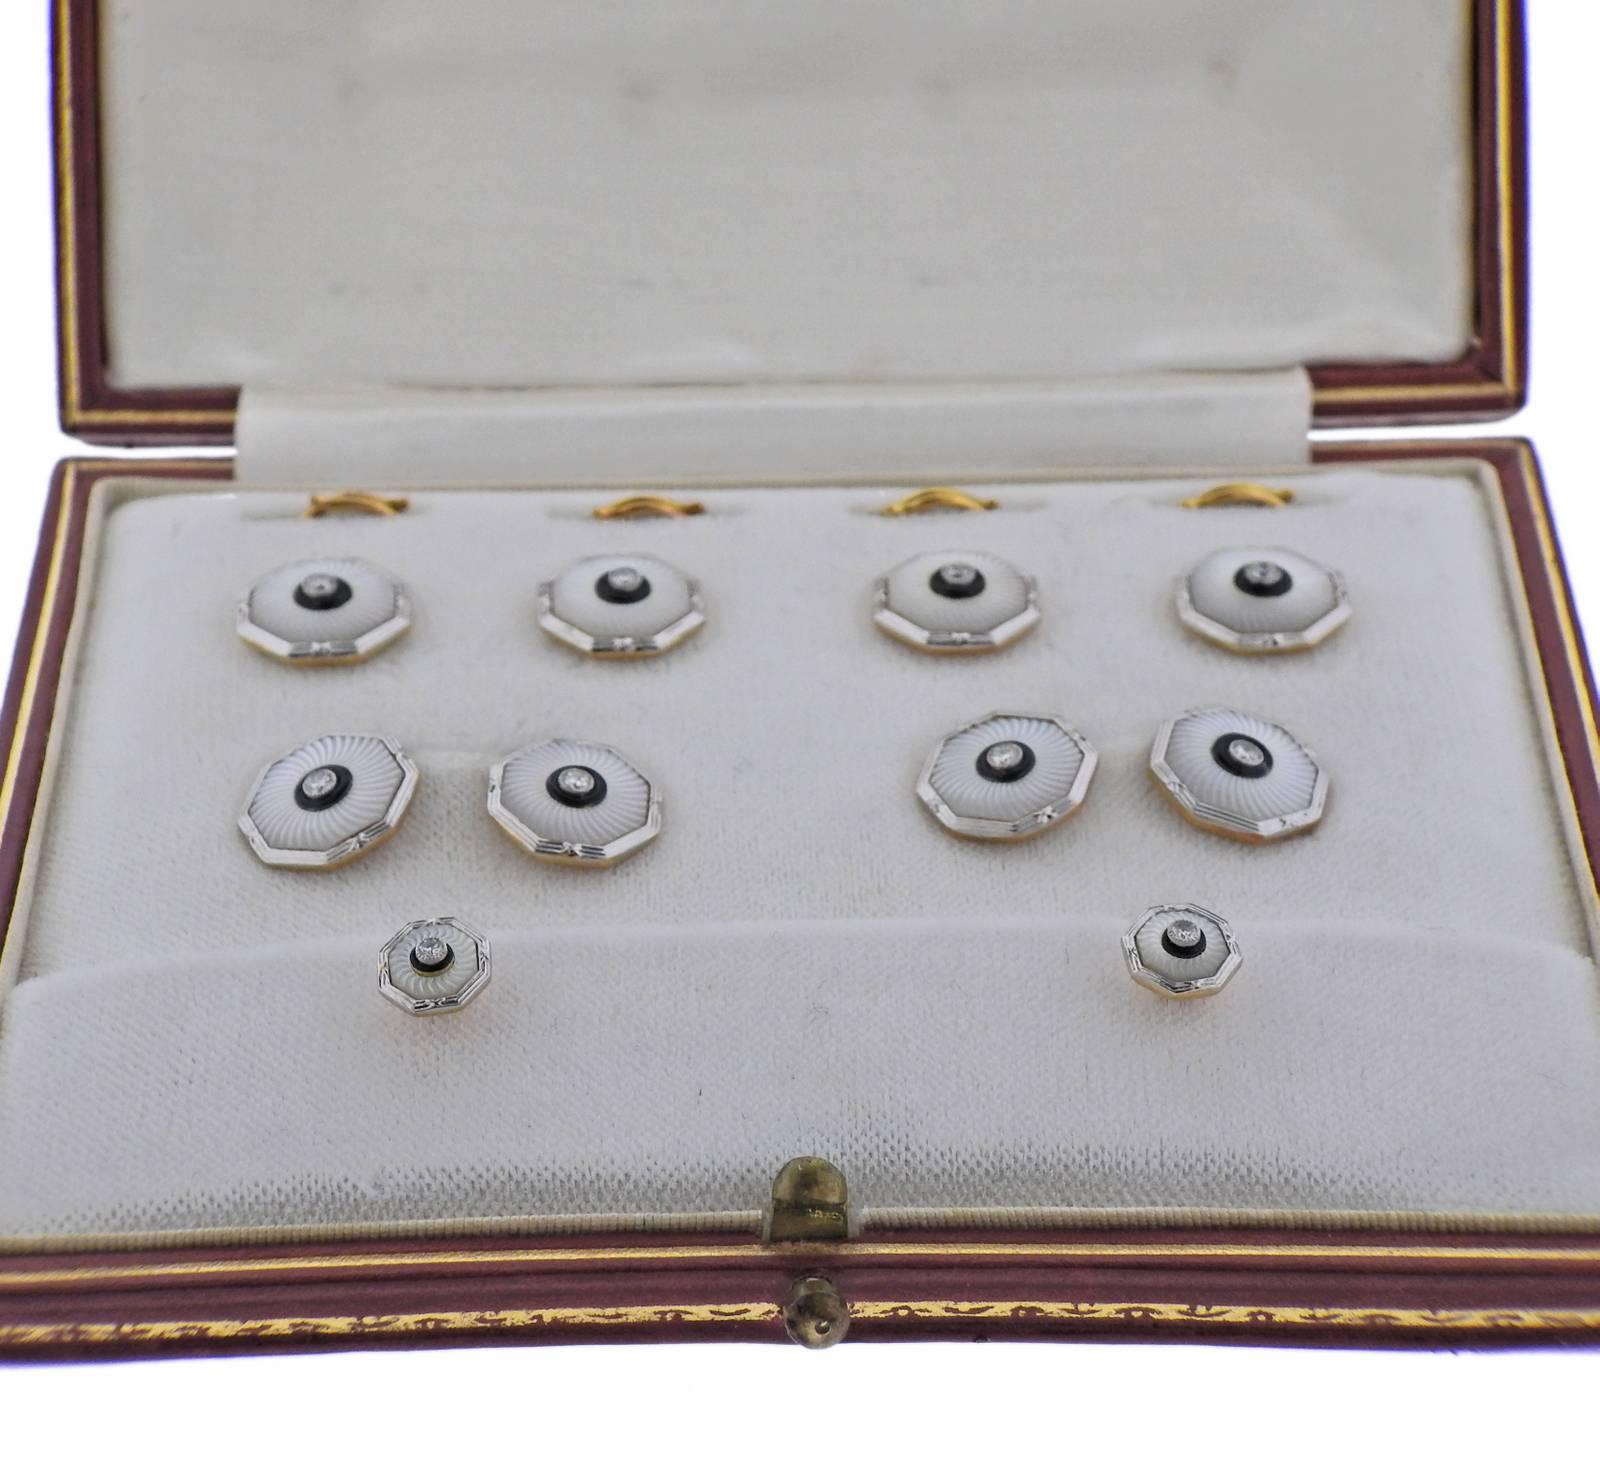 Classic Art Deco circa 1920s cufflinks, studs and buttons set, come in original box, decorated with crystal top, onyx and diamond in the center. Cufflink tops measure 12.4mm x 12.4mm, Buttons measure 12.5mm x 12.5mm and studs are 7.5mm x 7.5mm . Set